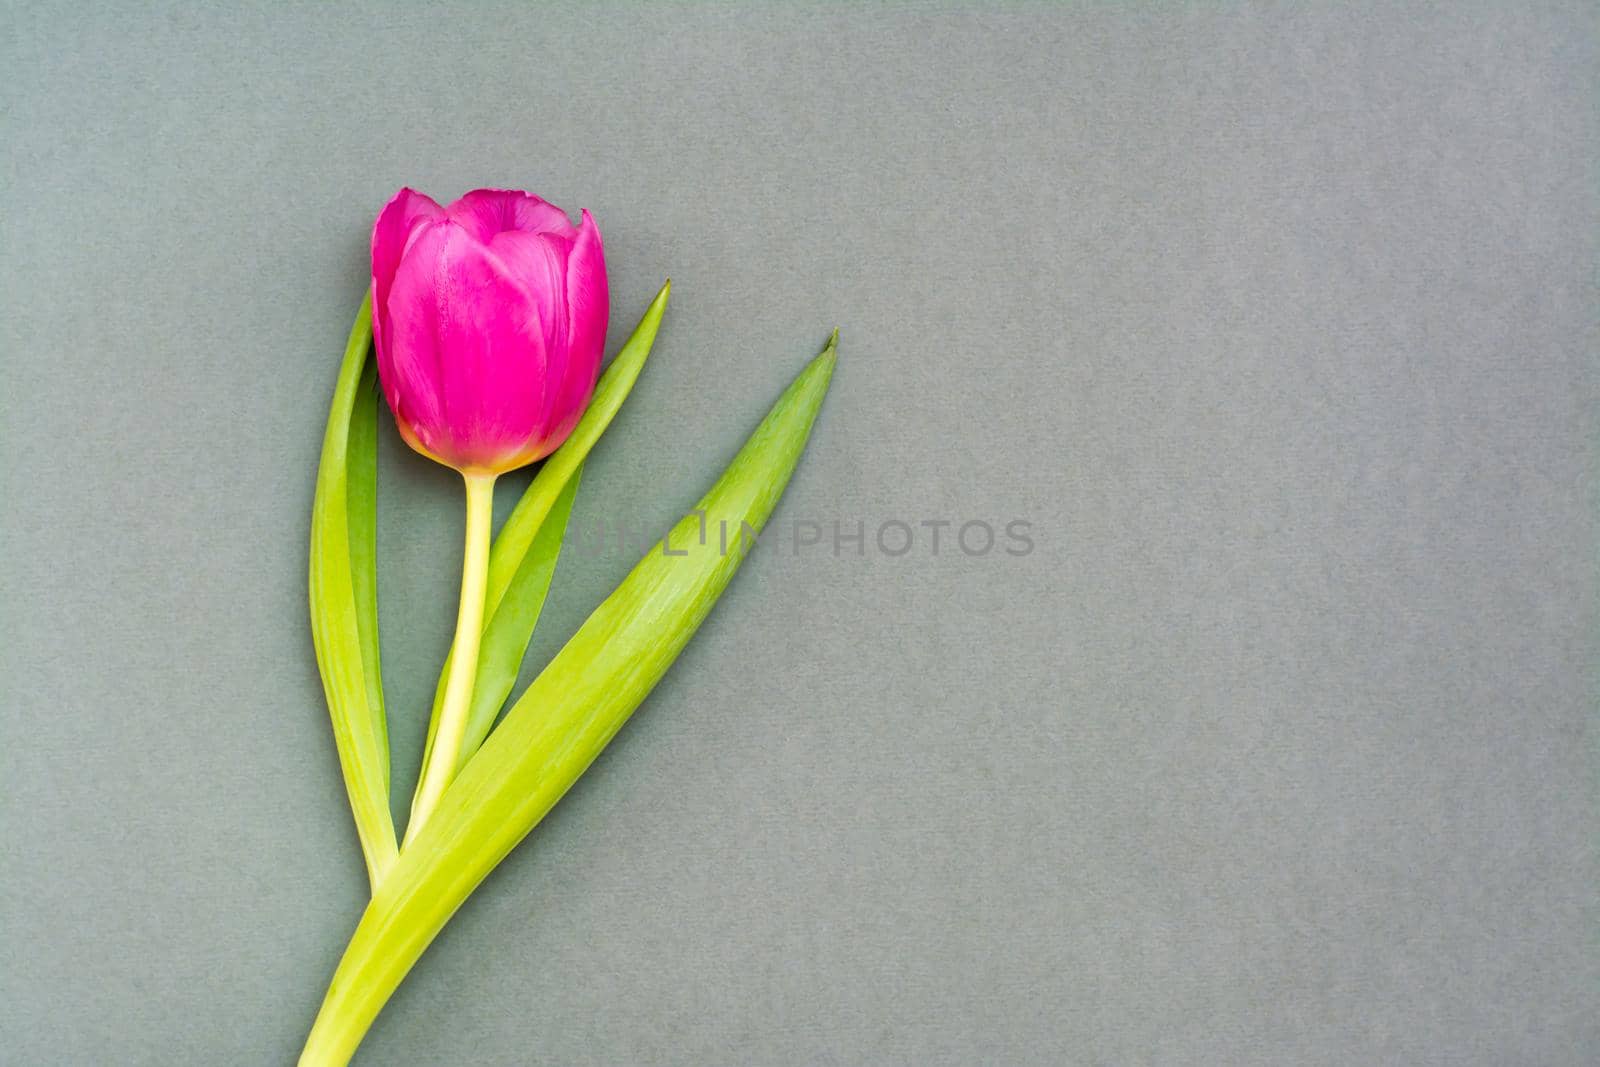 Lonely pink tulip with green leaves on a solid dark background. Copy space